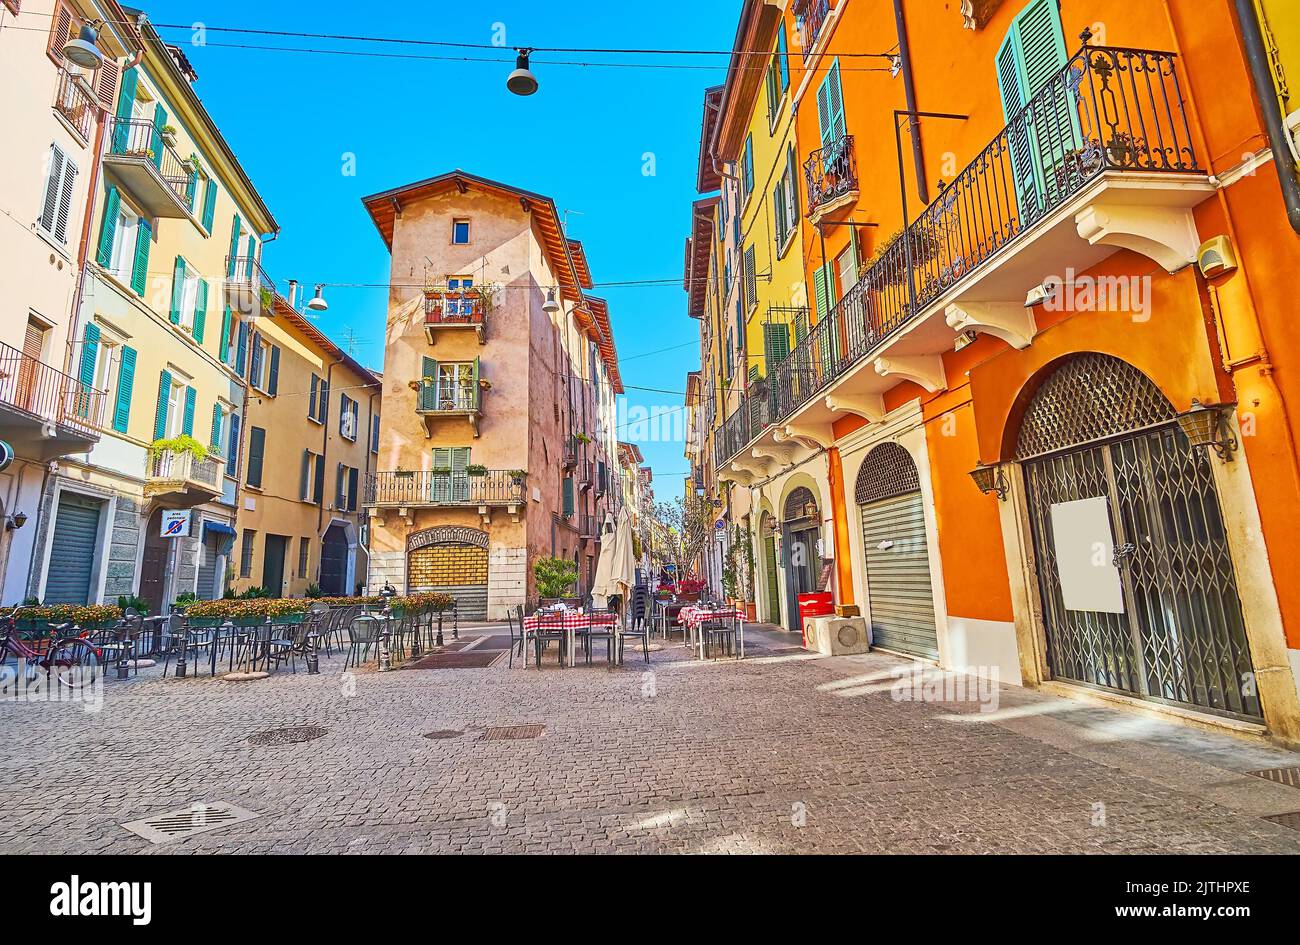 The old narrow Vicolo due Torri street with colored houses, small outdoor cafes, shops and tiny alleys, Brescia, Italy Stock Photo